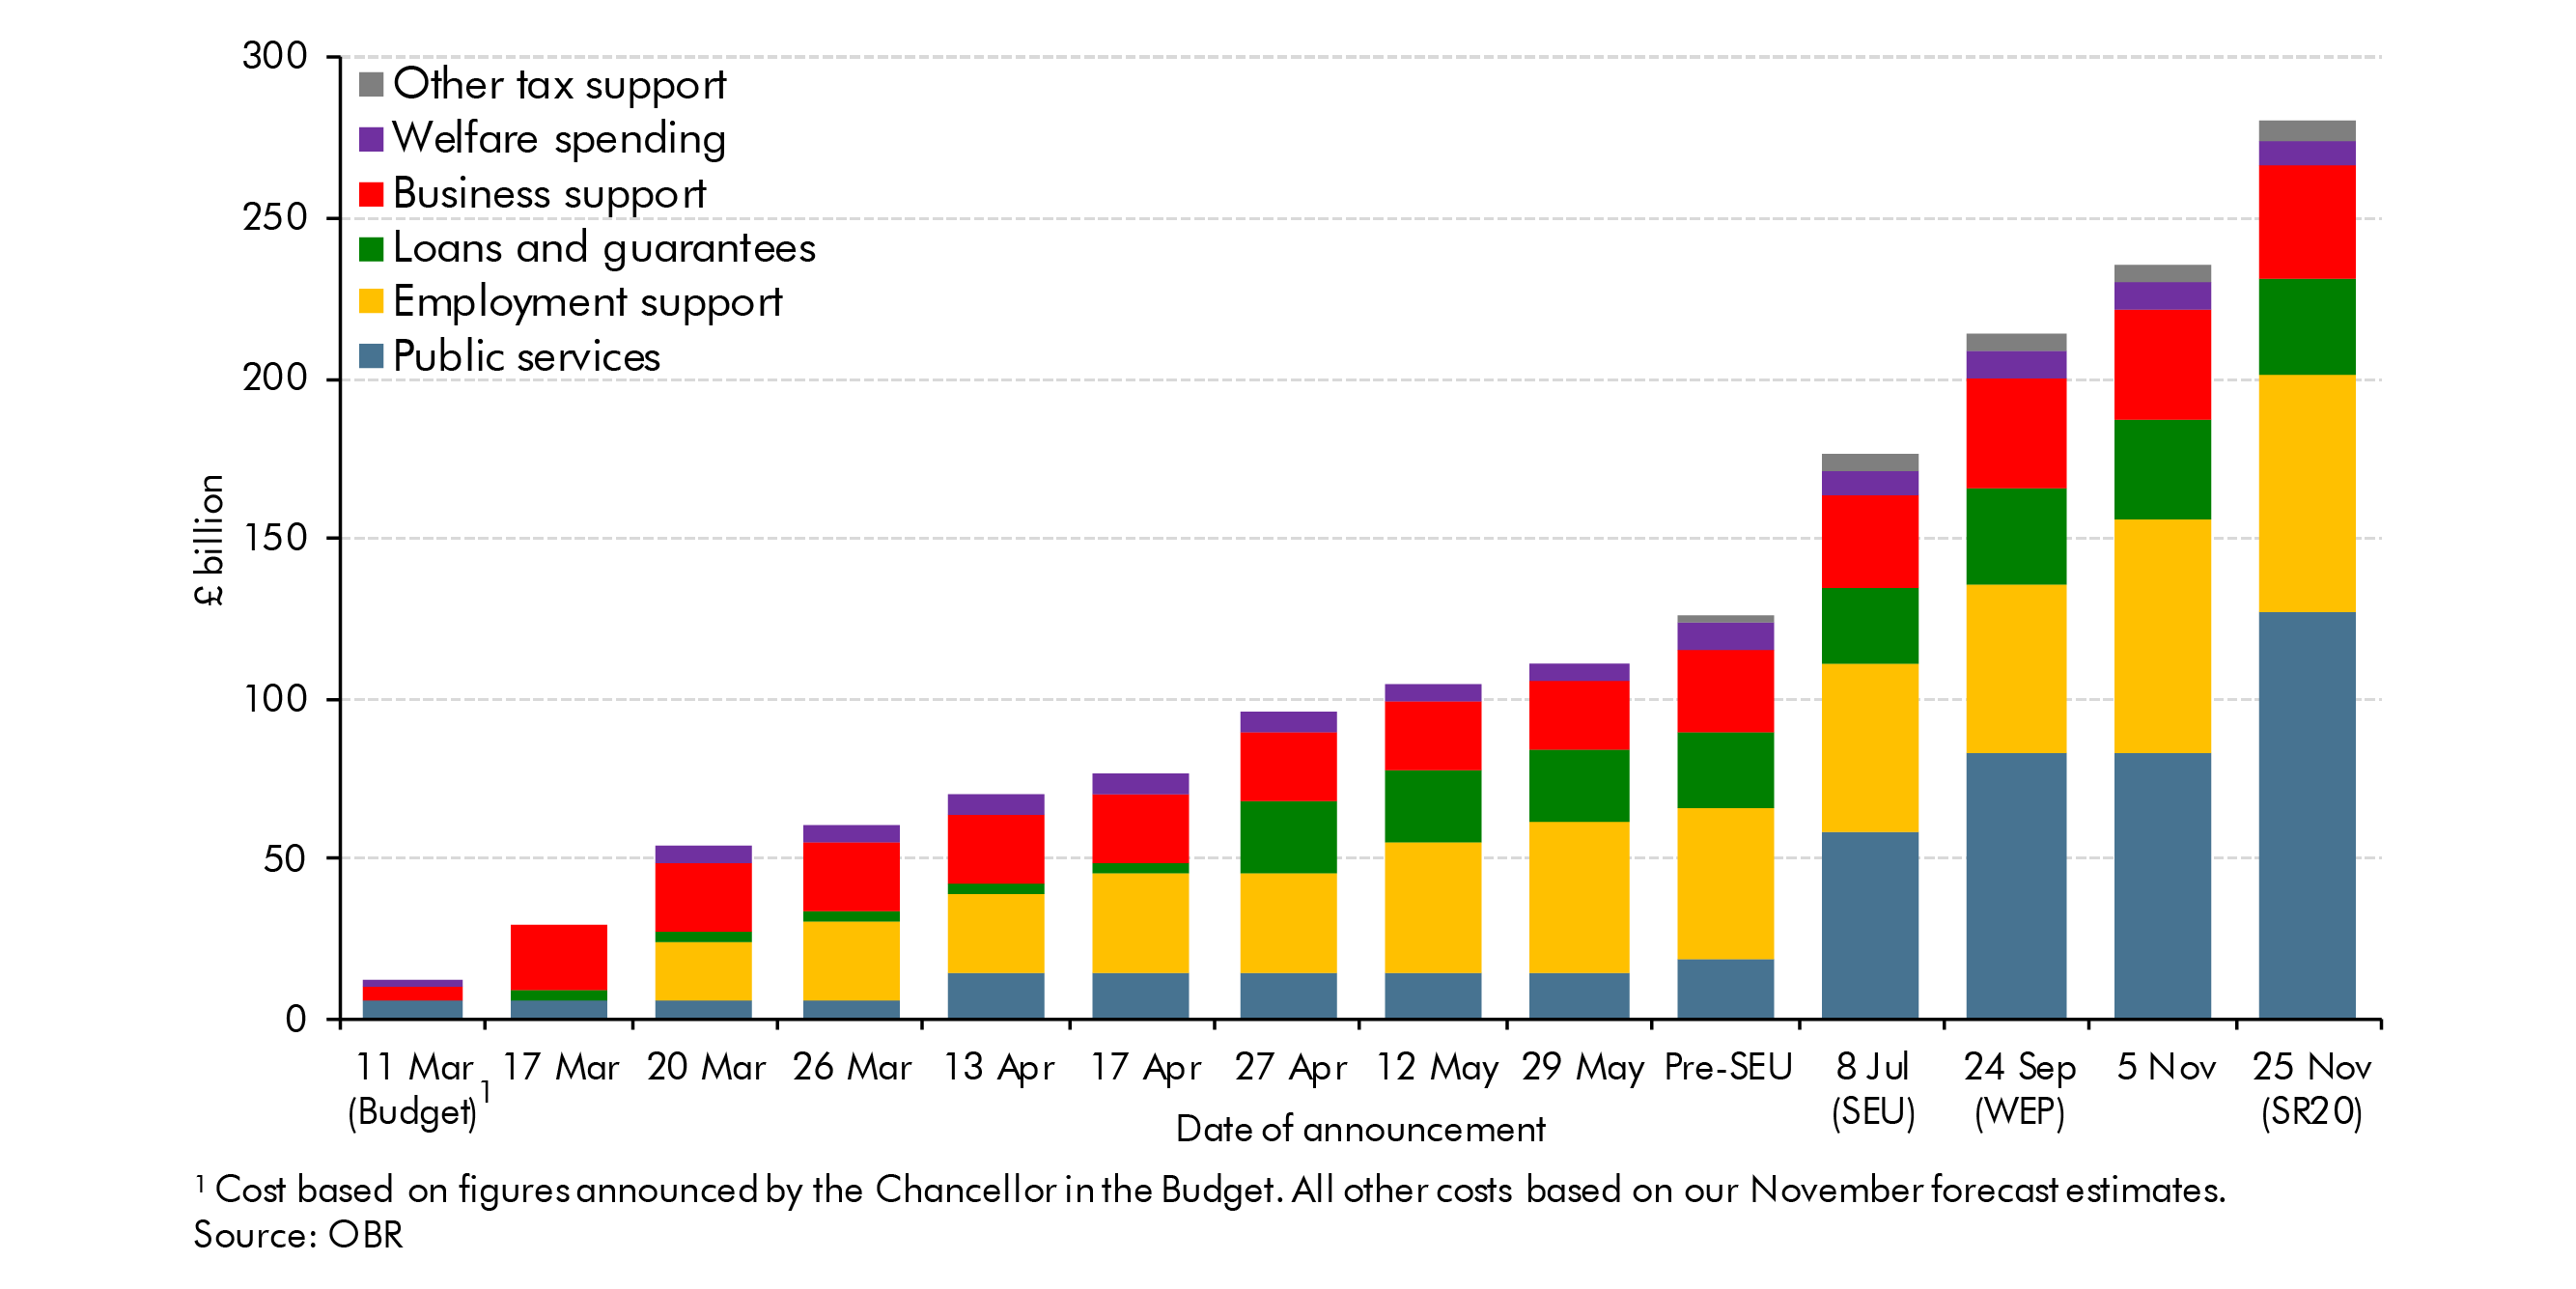 Chart 1 shows the increasing costs of the coronavirus policy response from the Chancellor's announcement on 11 March 2020 with figures until 25 November based on forecast estimates from the OBR.